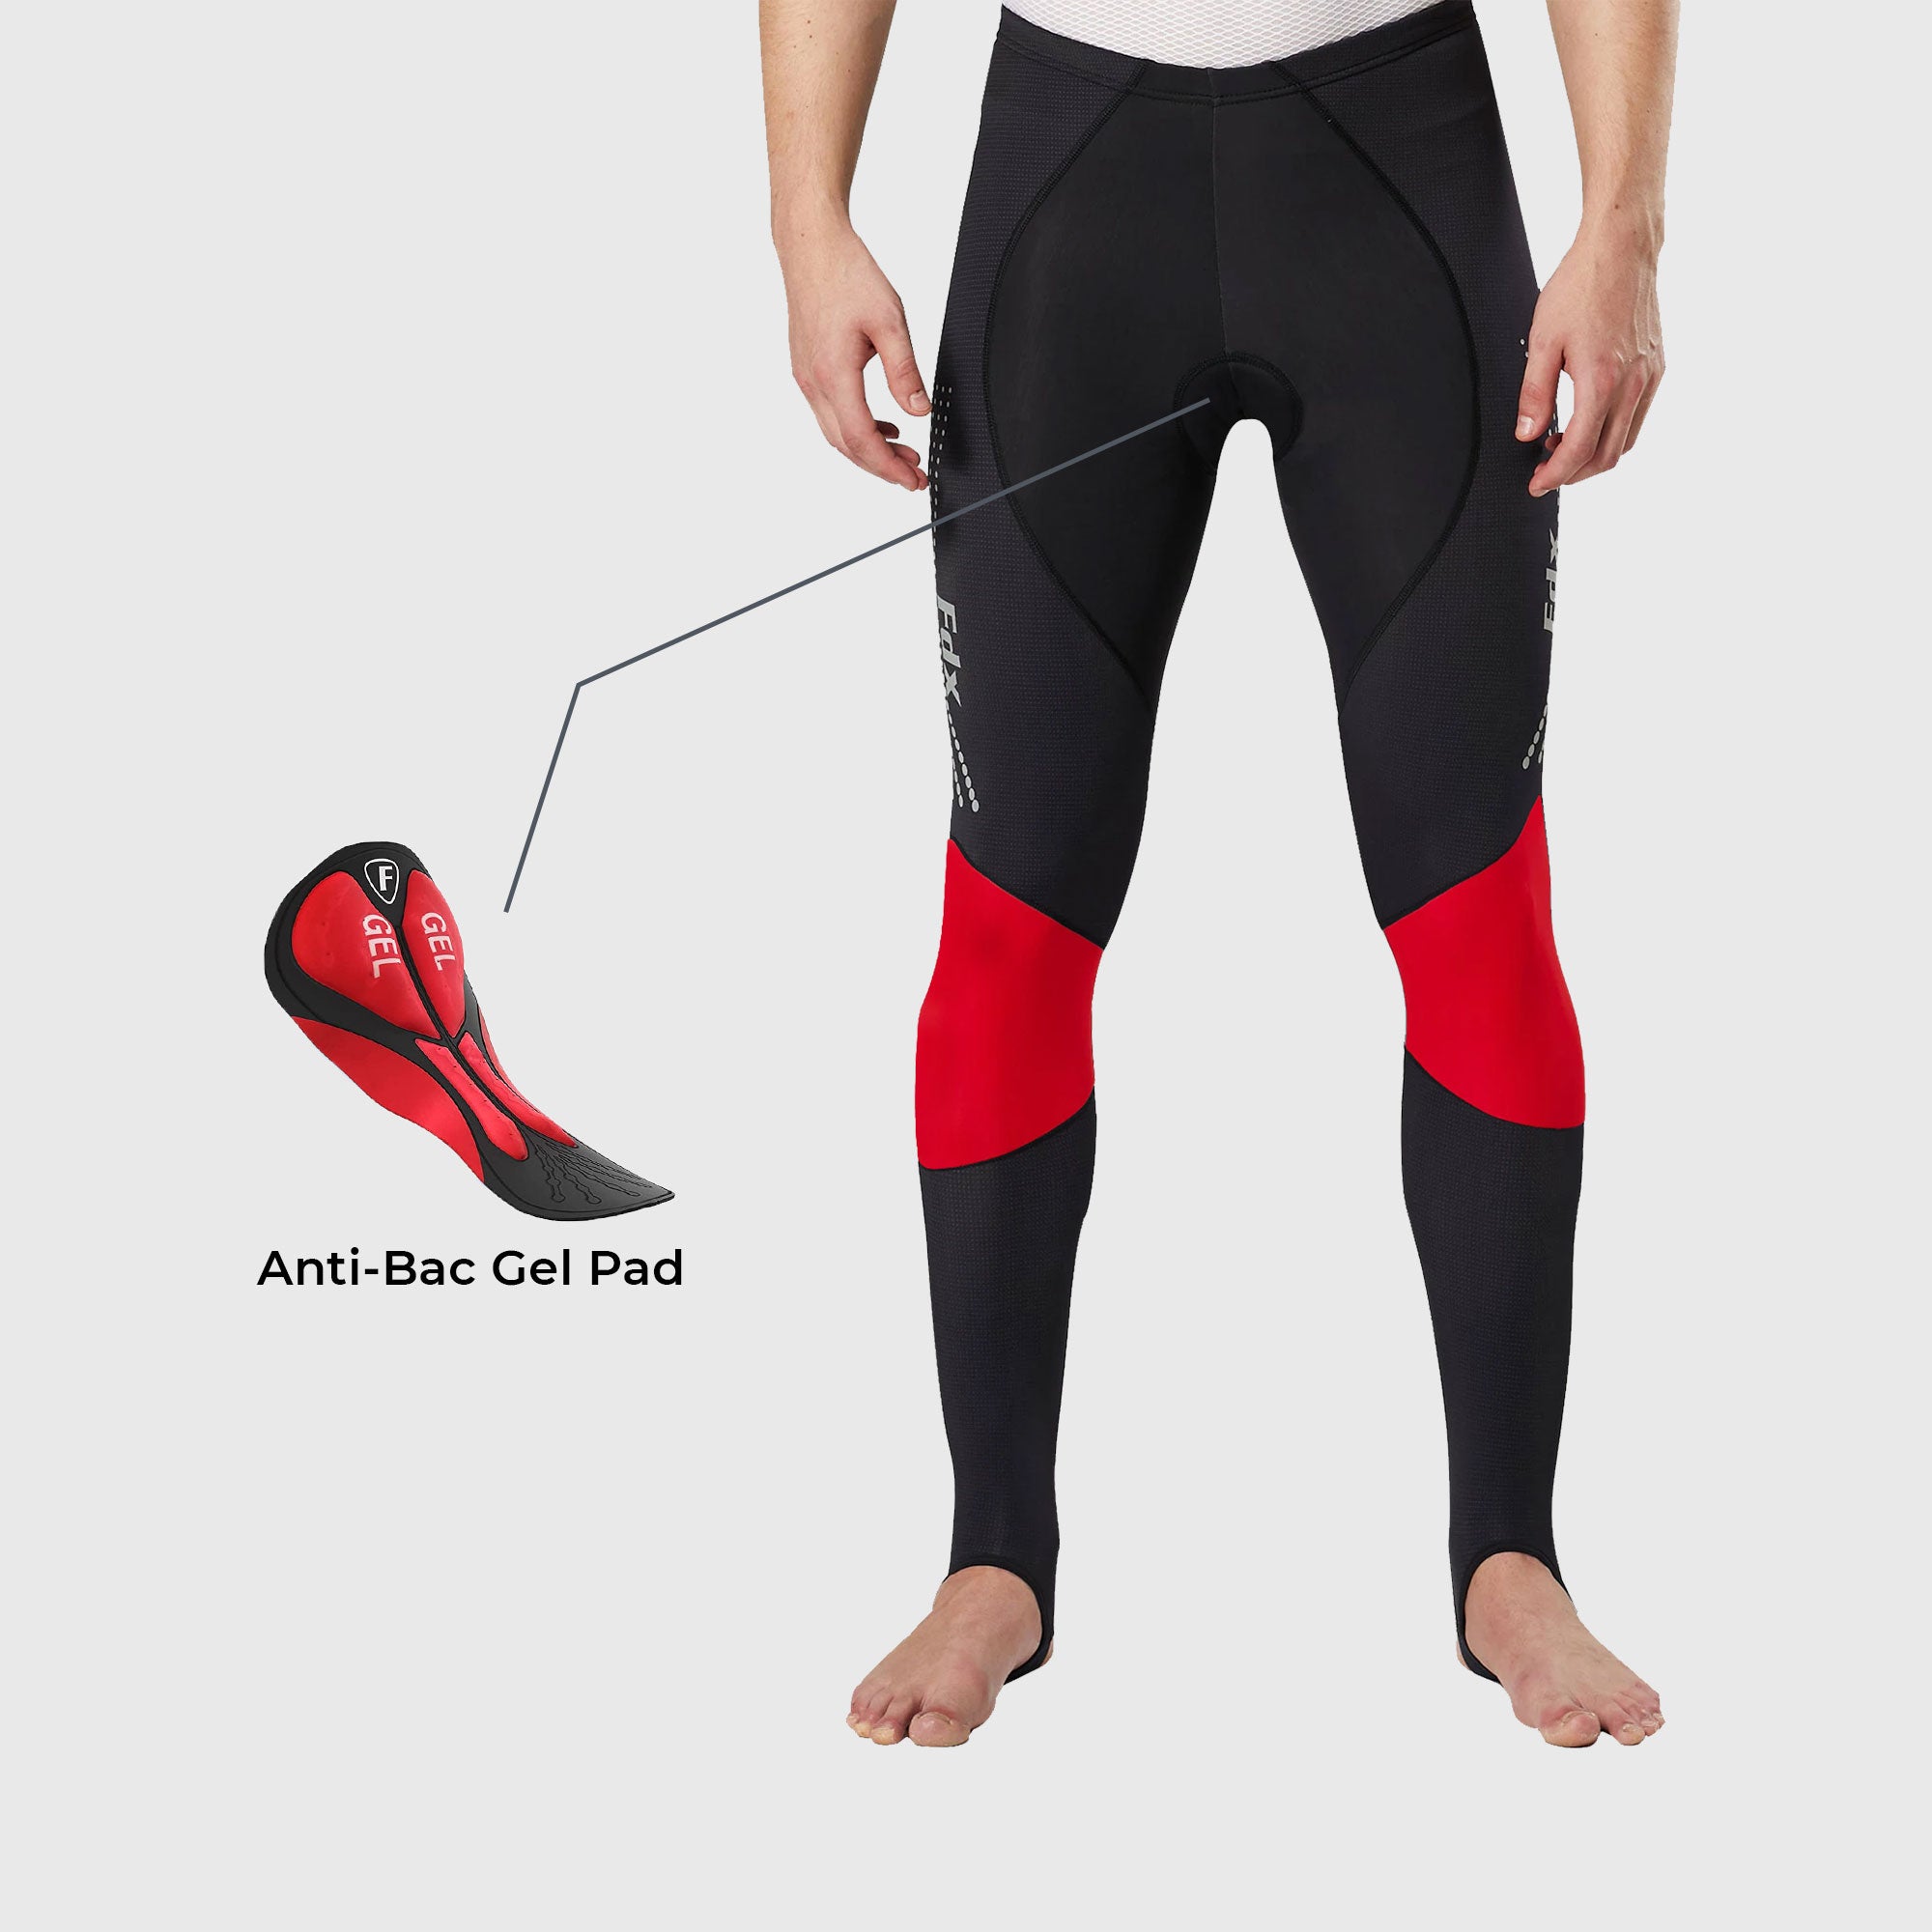 Fdx Mens Black & Red Chamois Gel Padded Cycling Tights For Winter Roubaix Thermal Fleece Reflective Warm Leggings - Thermodream Bike Long Pants